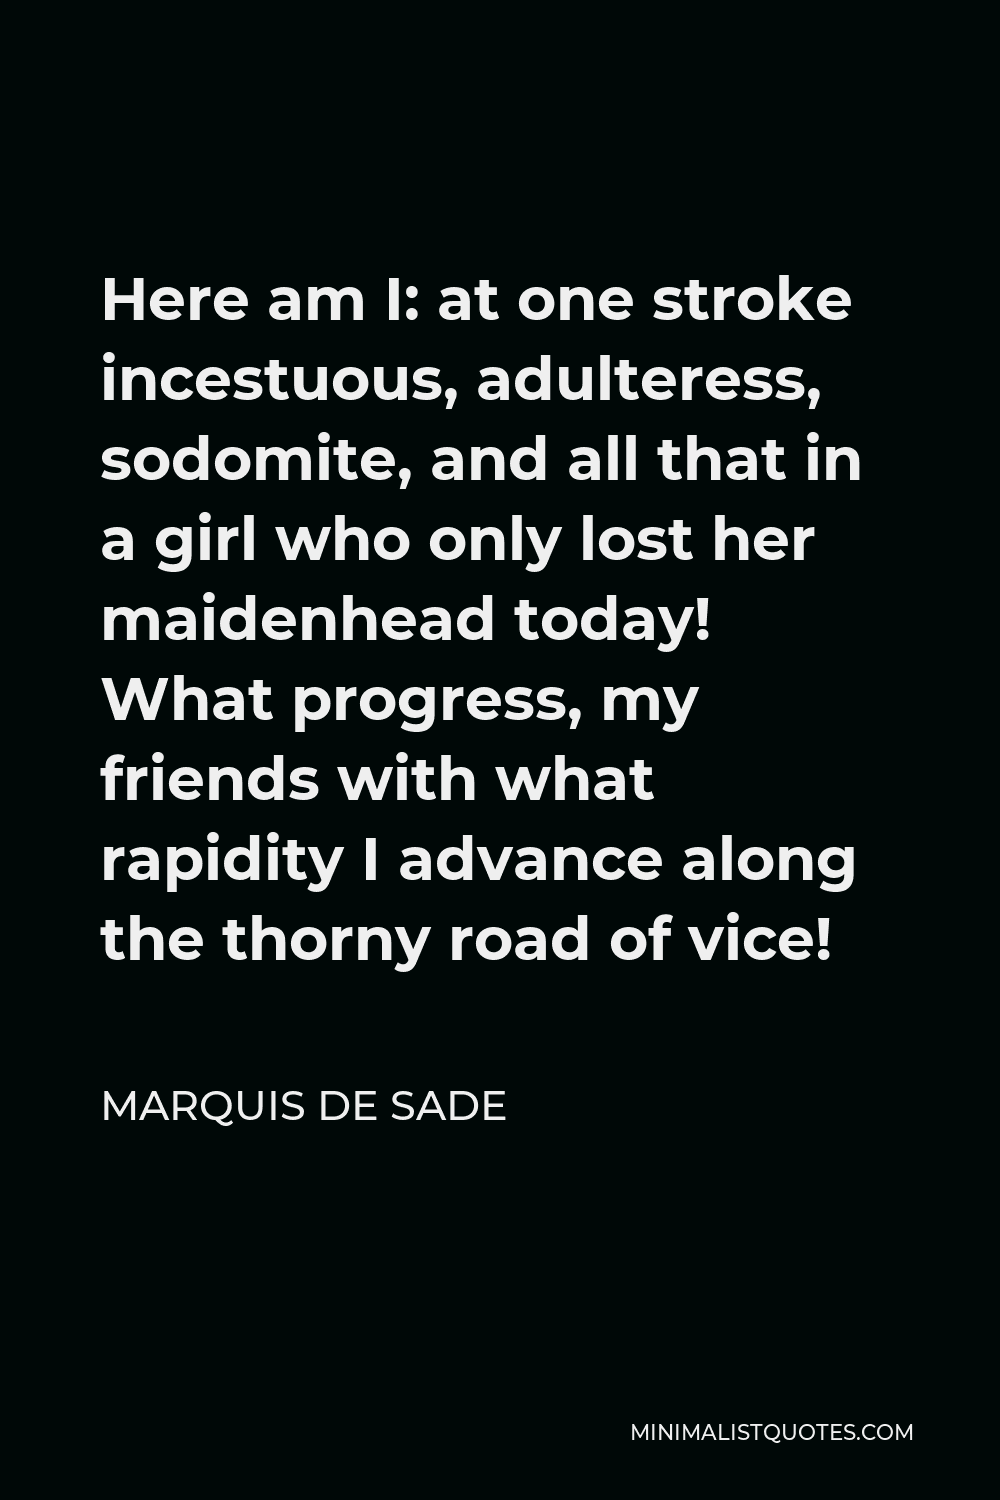 Marquis de Sade Quote - Here am I: at one stroke incestuous, adulteress, sodomite, and all that in a girl who only lost her maidenhead today! What progress, my friends with what rapidity I advance along the thorny road of vice!